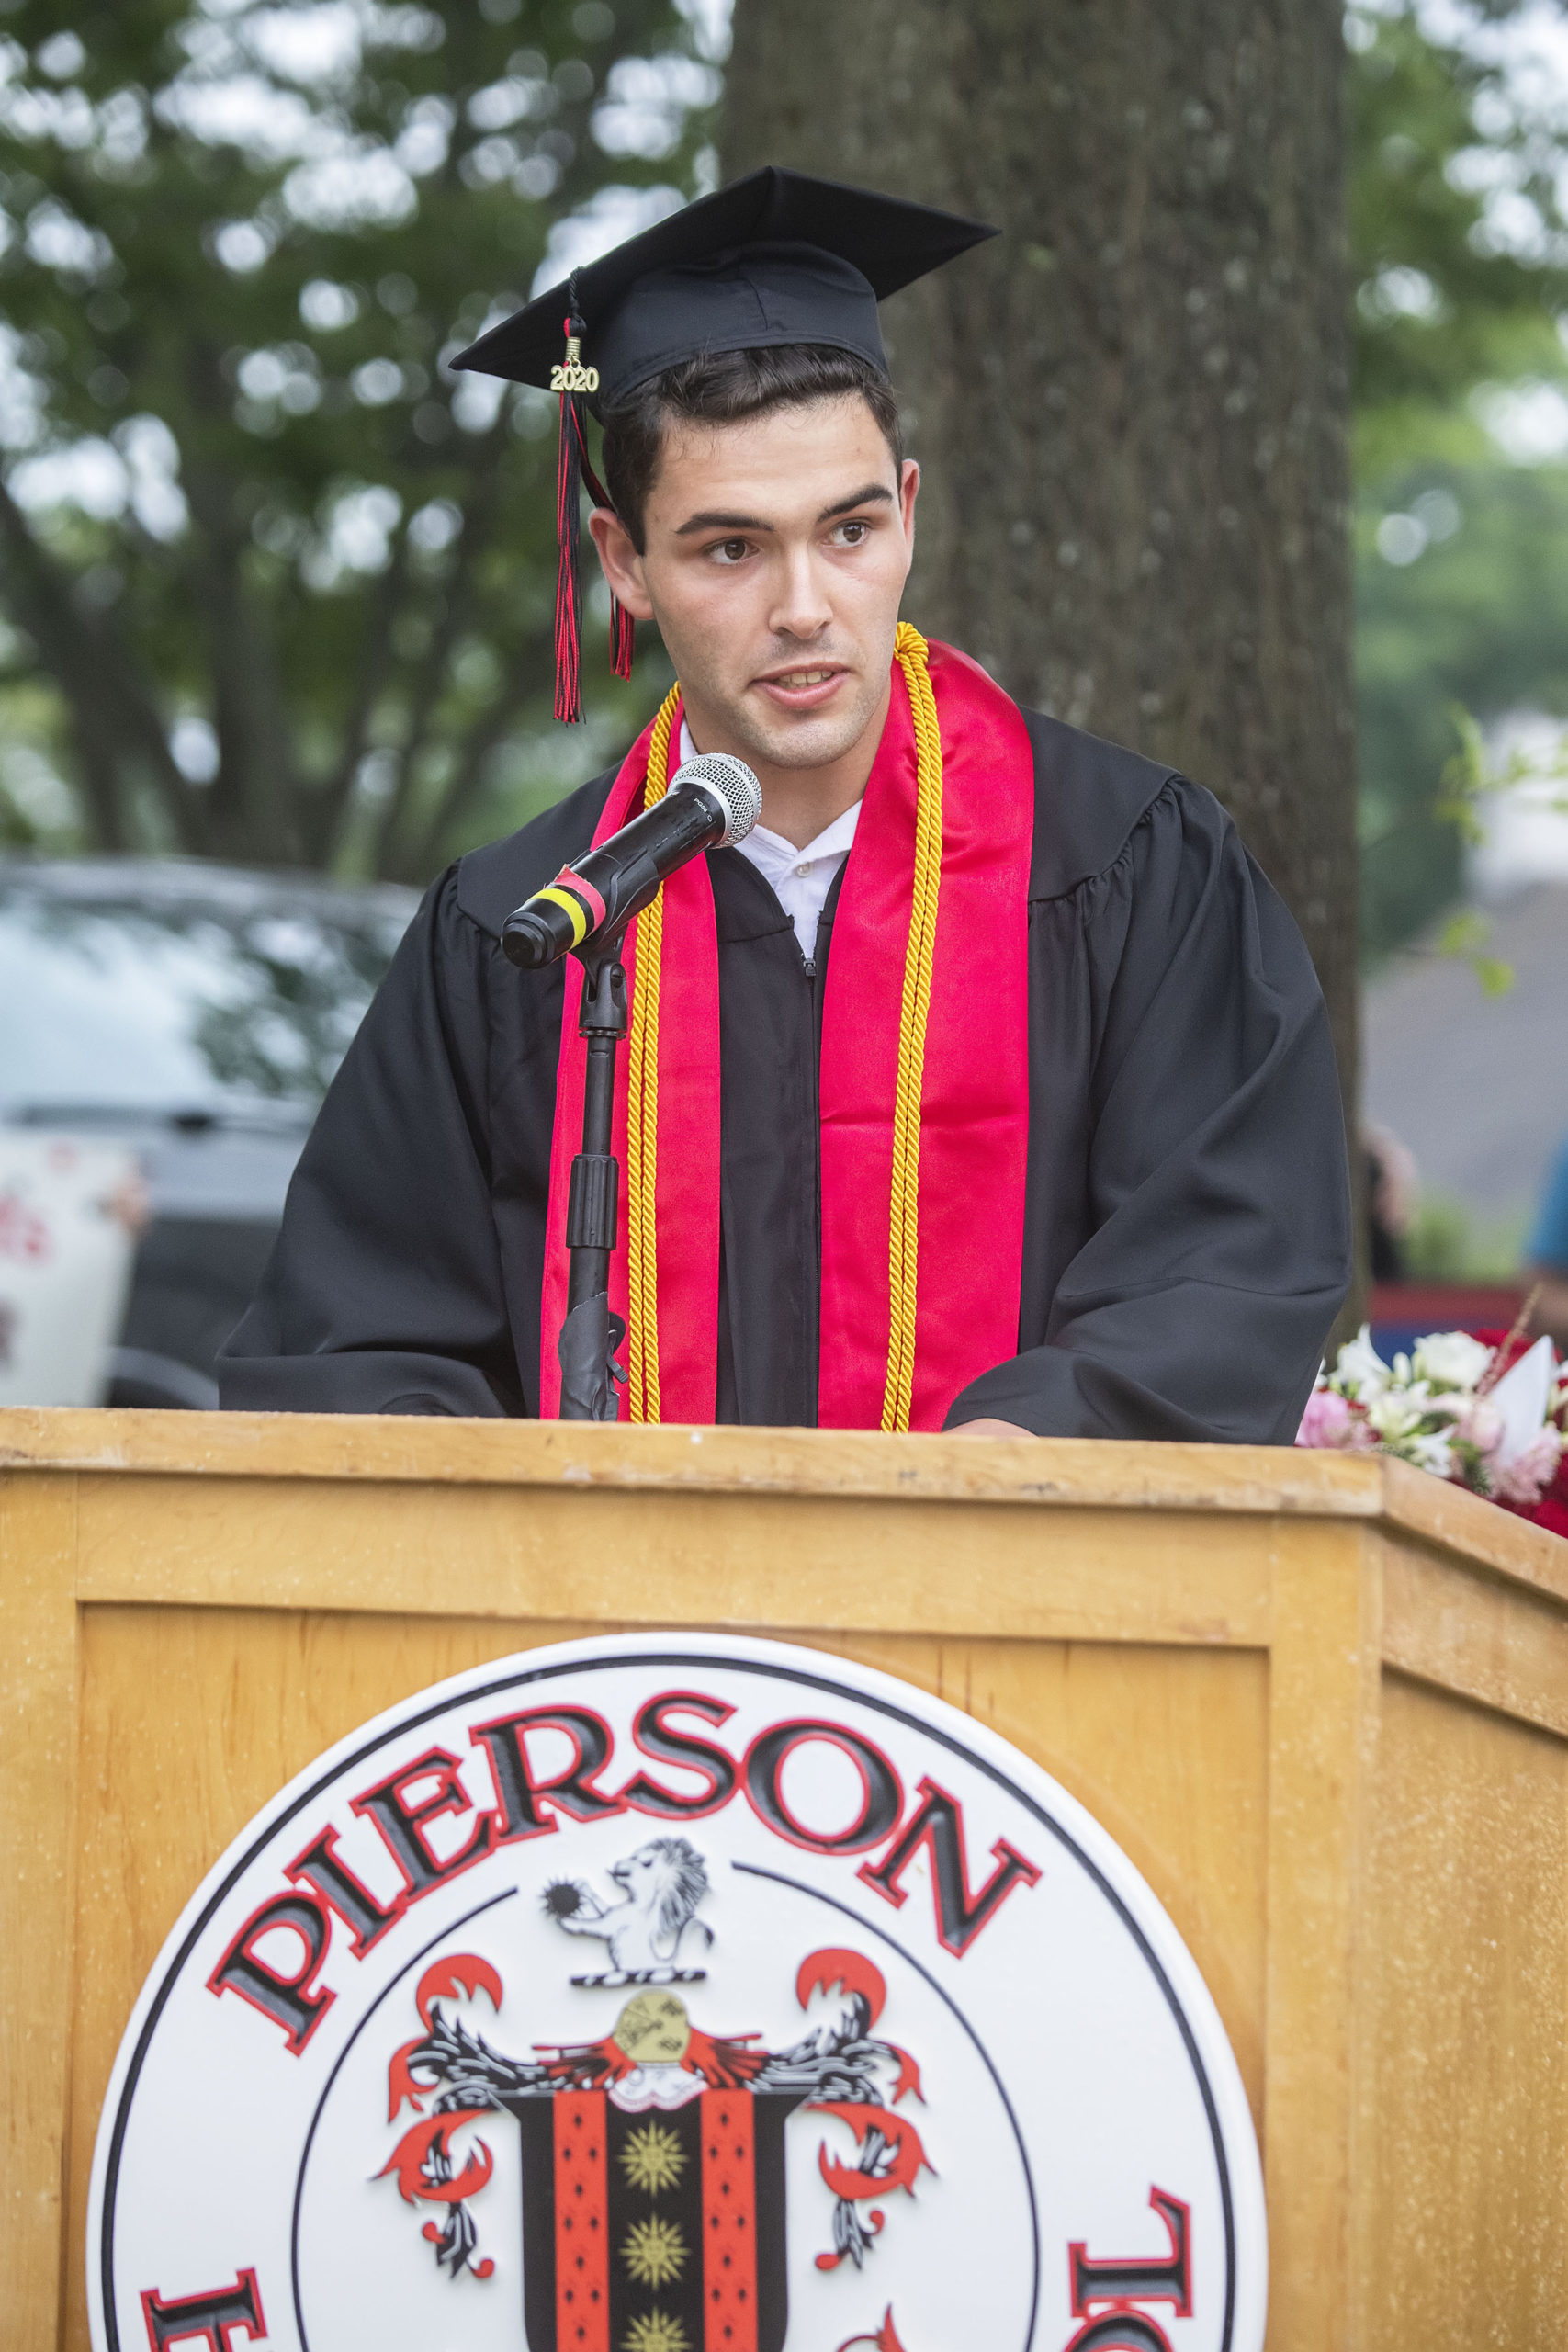 Salutatorian Chase Allardice speaks during the Pierson High School 2020 Commencement Ceremony at Pierson High School on Saturday.